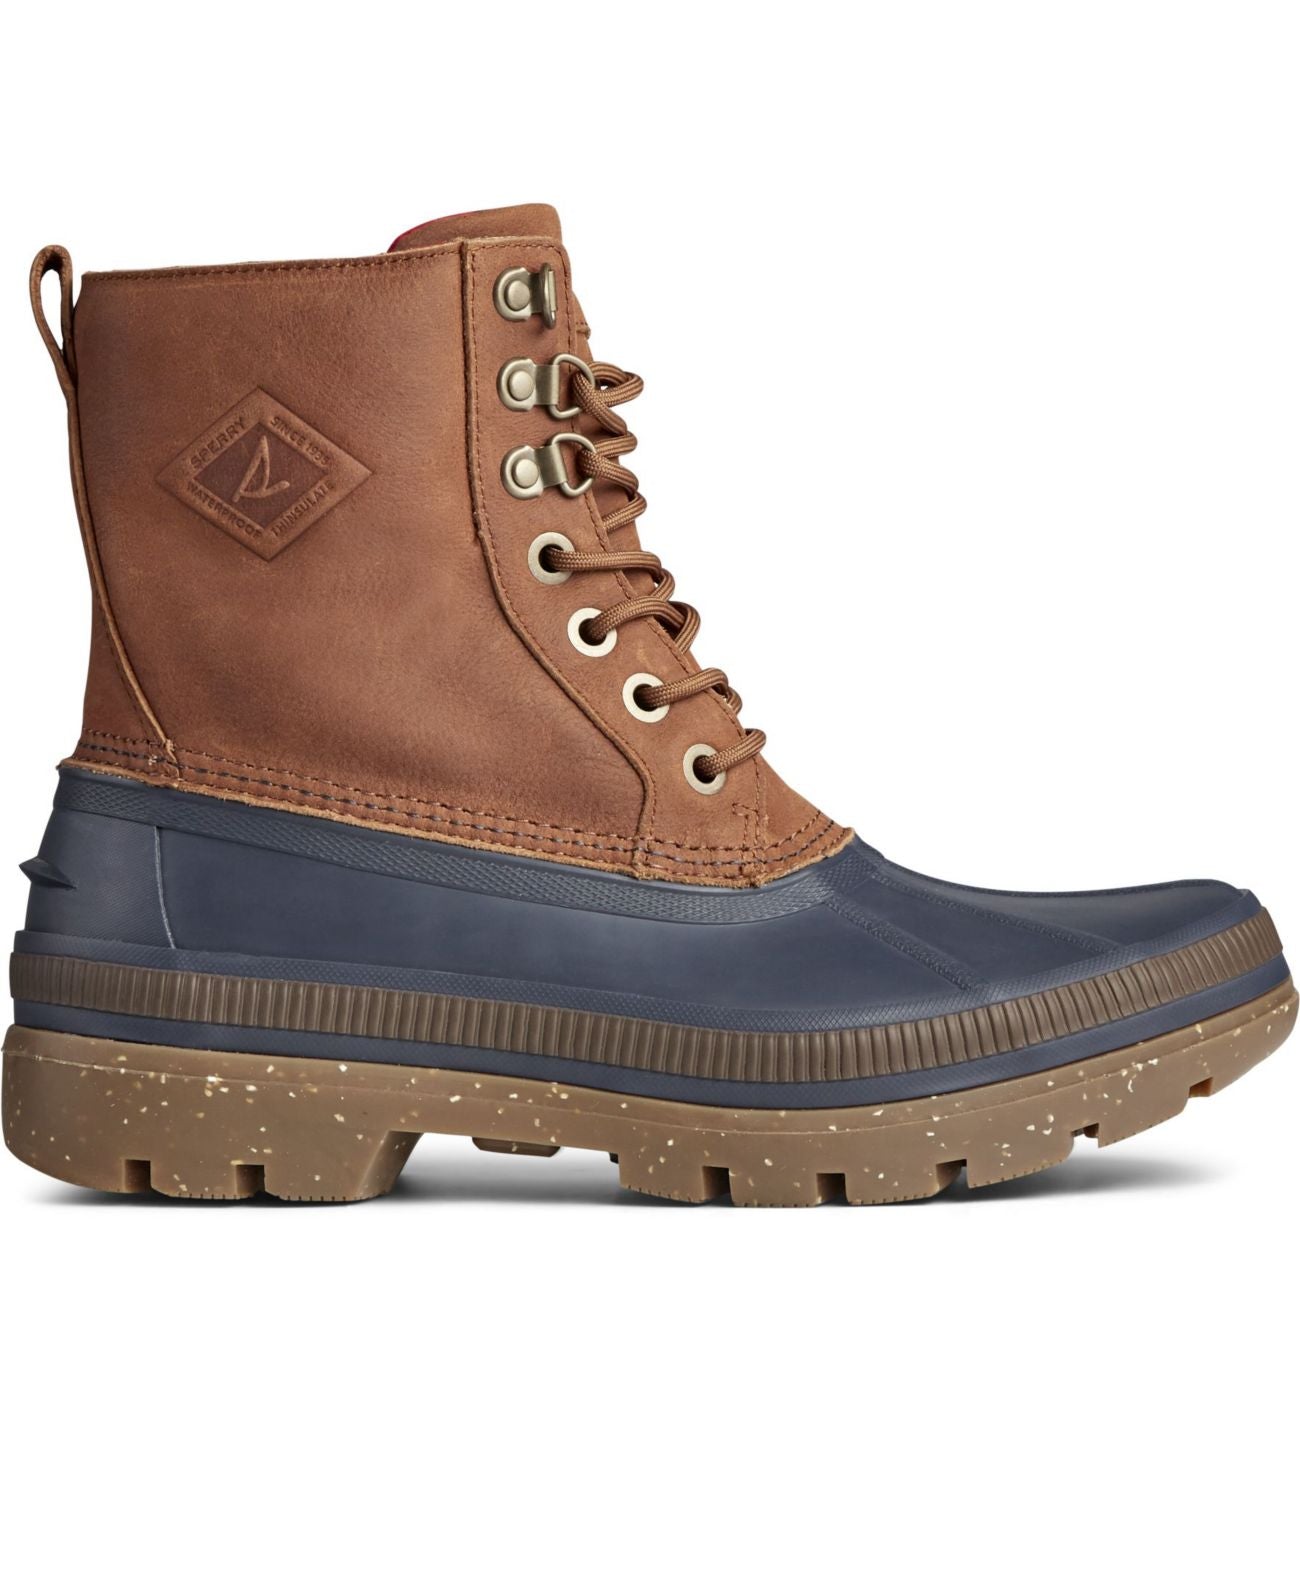 Sperry Men's Ice Bay Boots